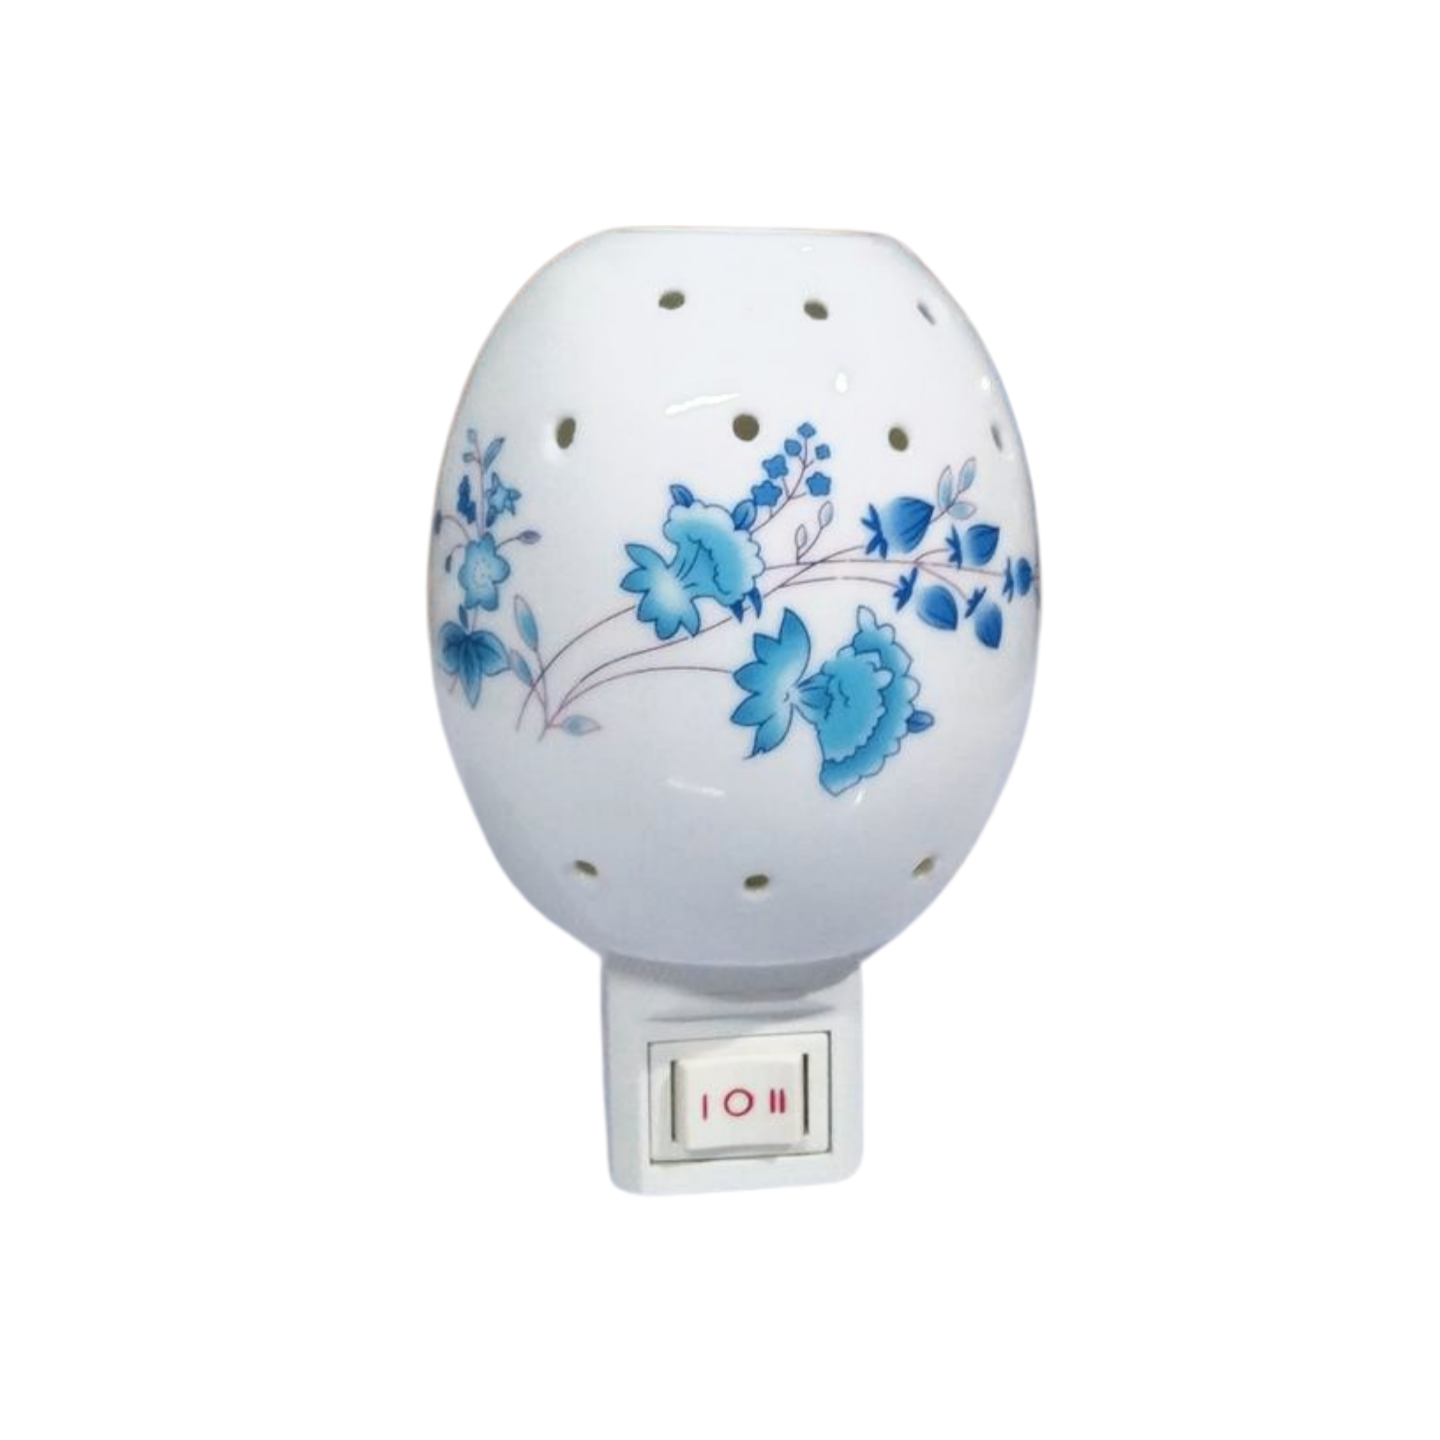 Kriti creations Beautiful Direct Plug-in/Aroma Diffuser Cum Night Lamp with Light Essential Oil Diffuser Made in India Electrical Diffuser